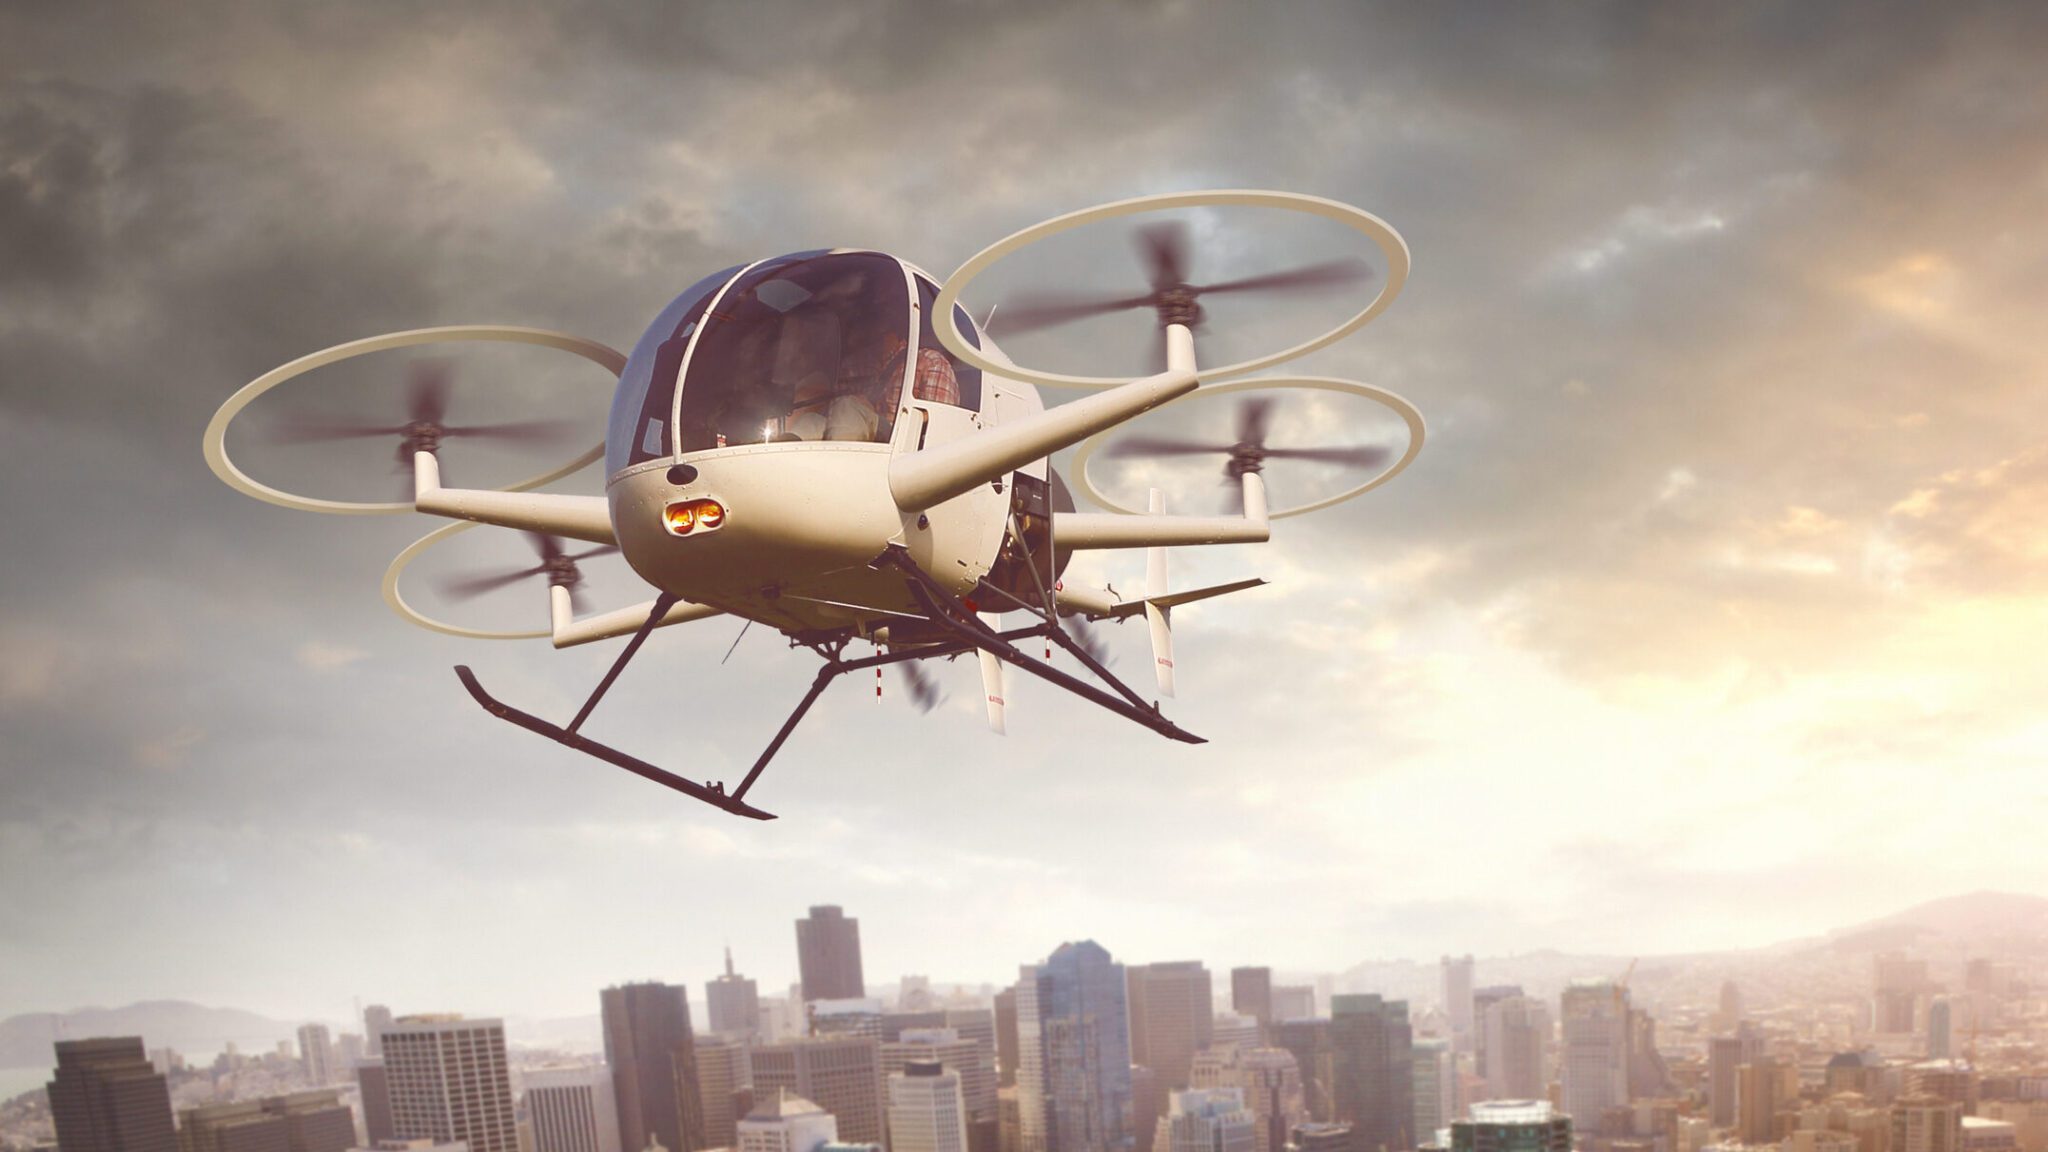 Are Air Taxis Ready For Prime Time?